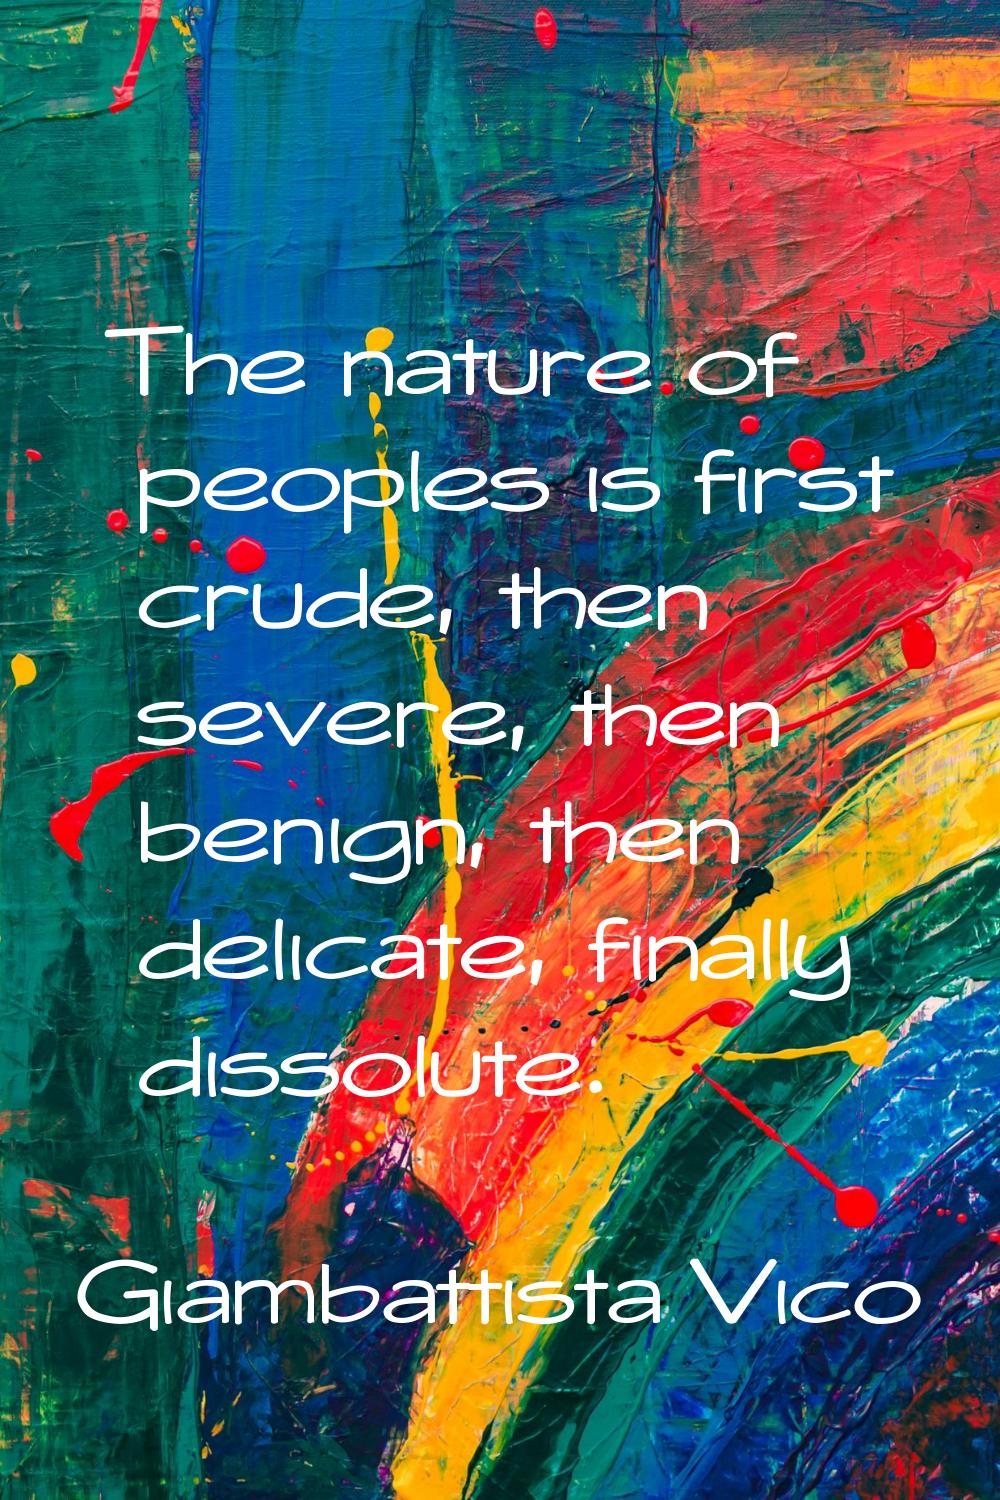 The nature of peoples is first crude, then severe, then benign, then delicate, finally dissolute.